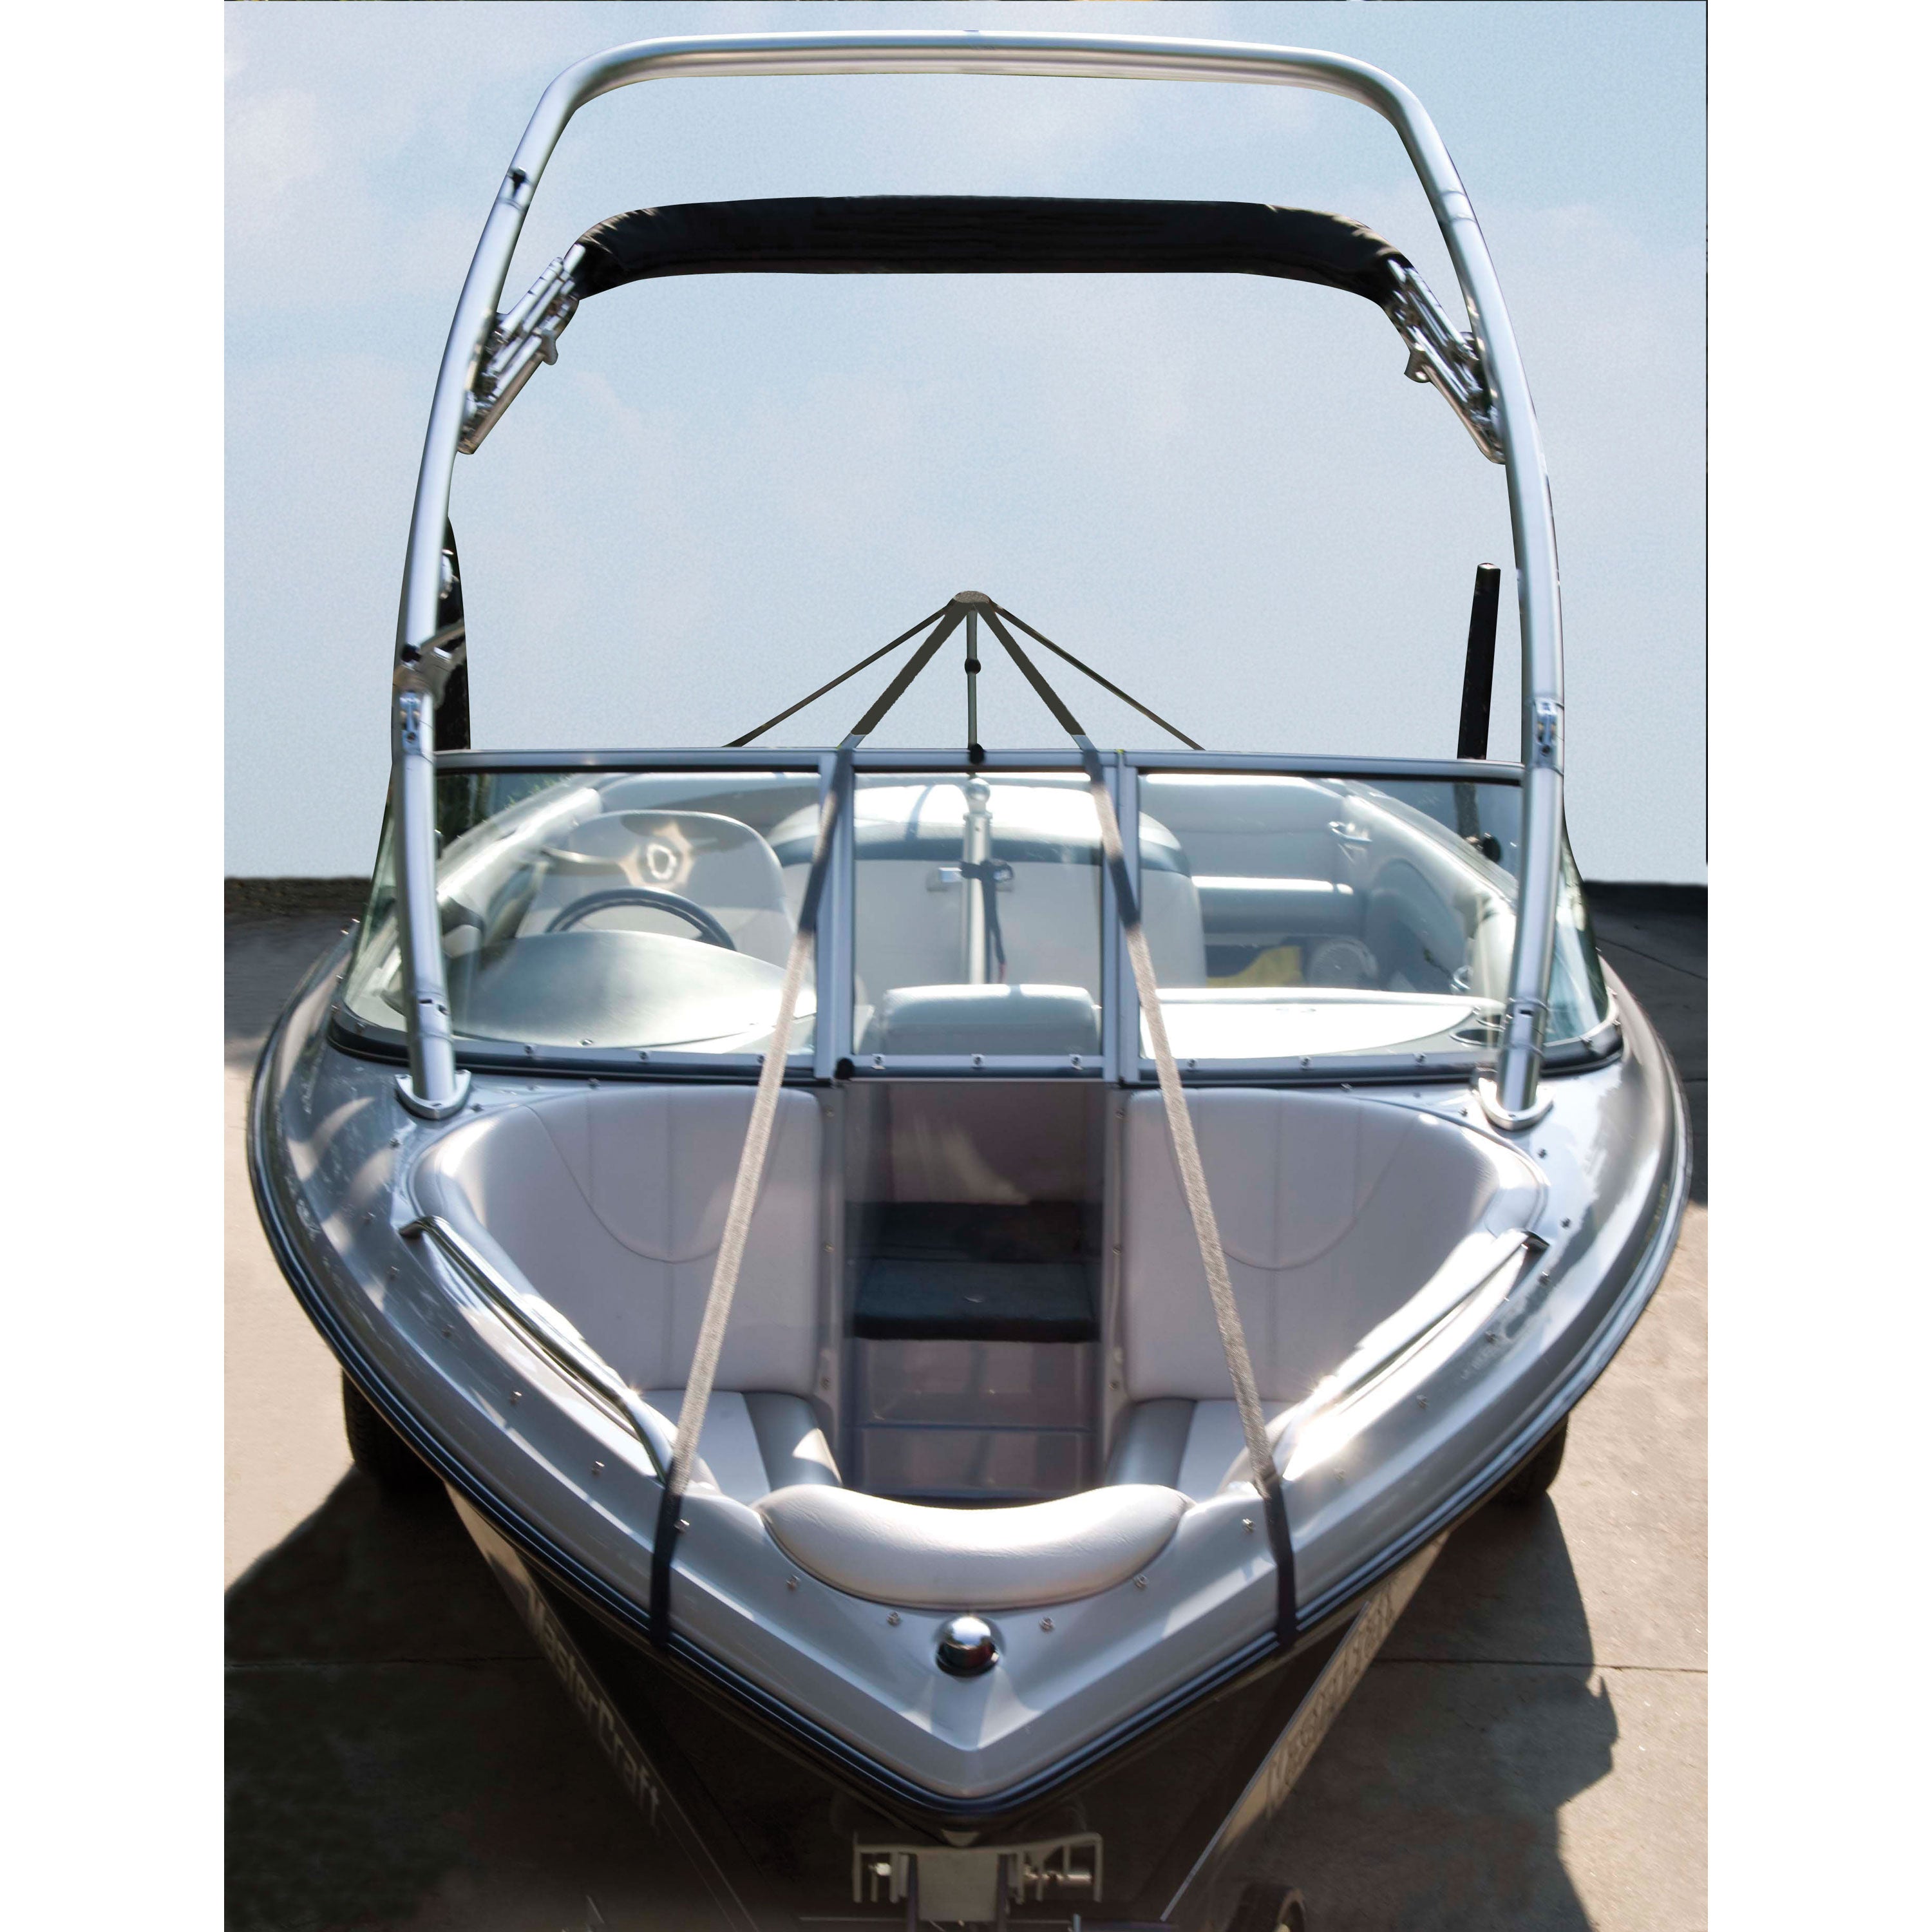 Carver 60008 Boat Cover Support System